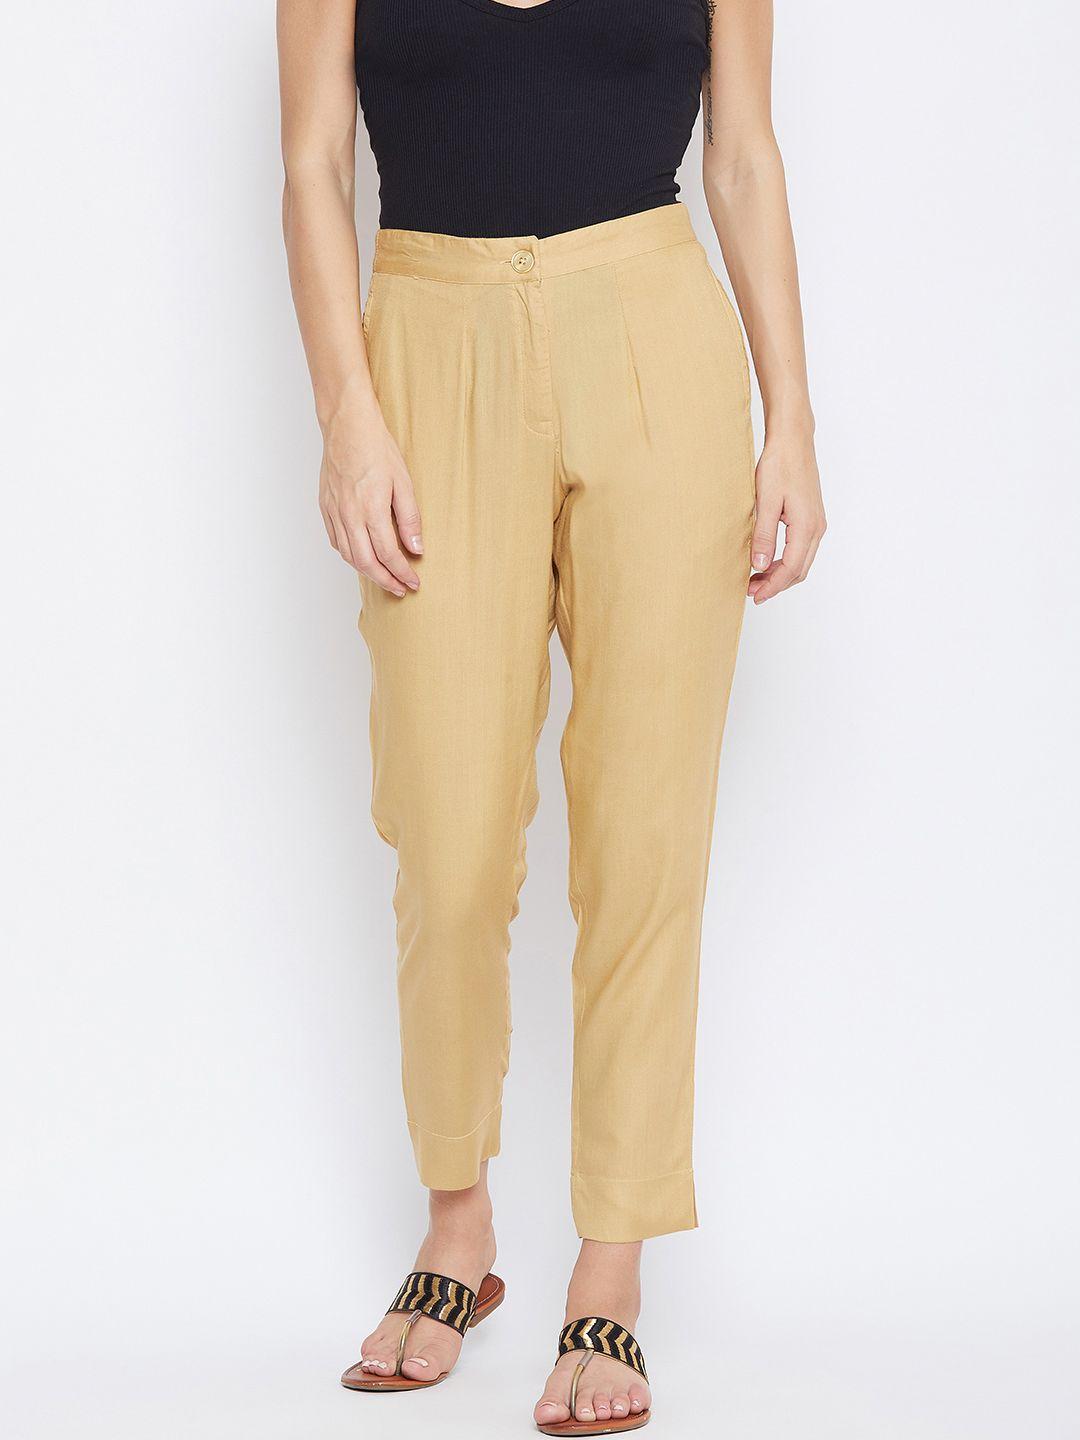 fabglobal women beige relaxed slim fit solid regular trousers